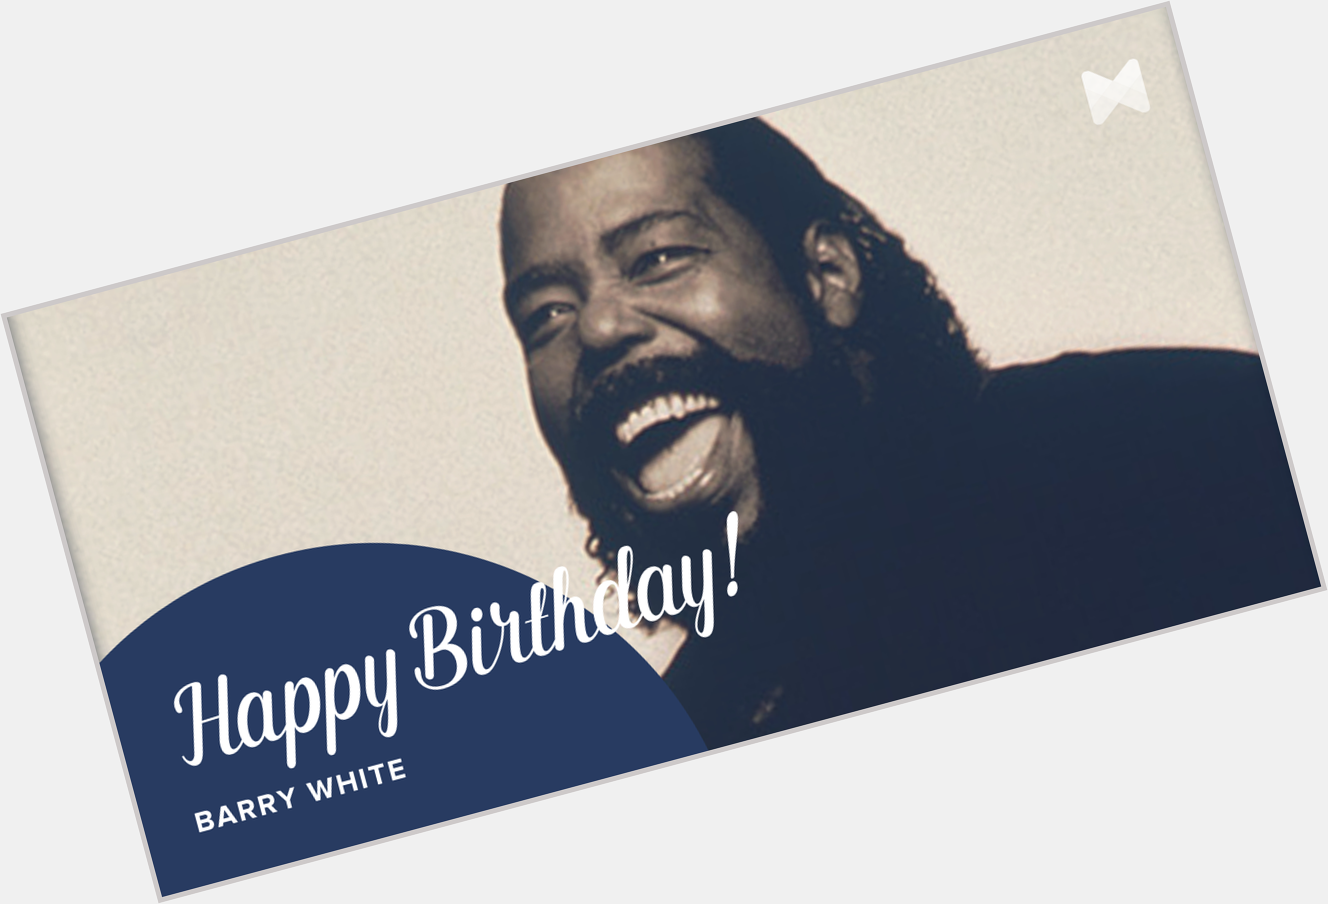 Happy Birthday Barry White! The soul legend would have turned 71 today. 